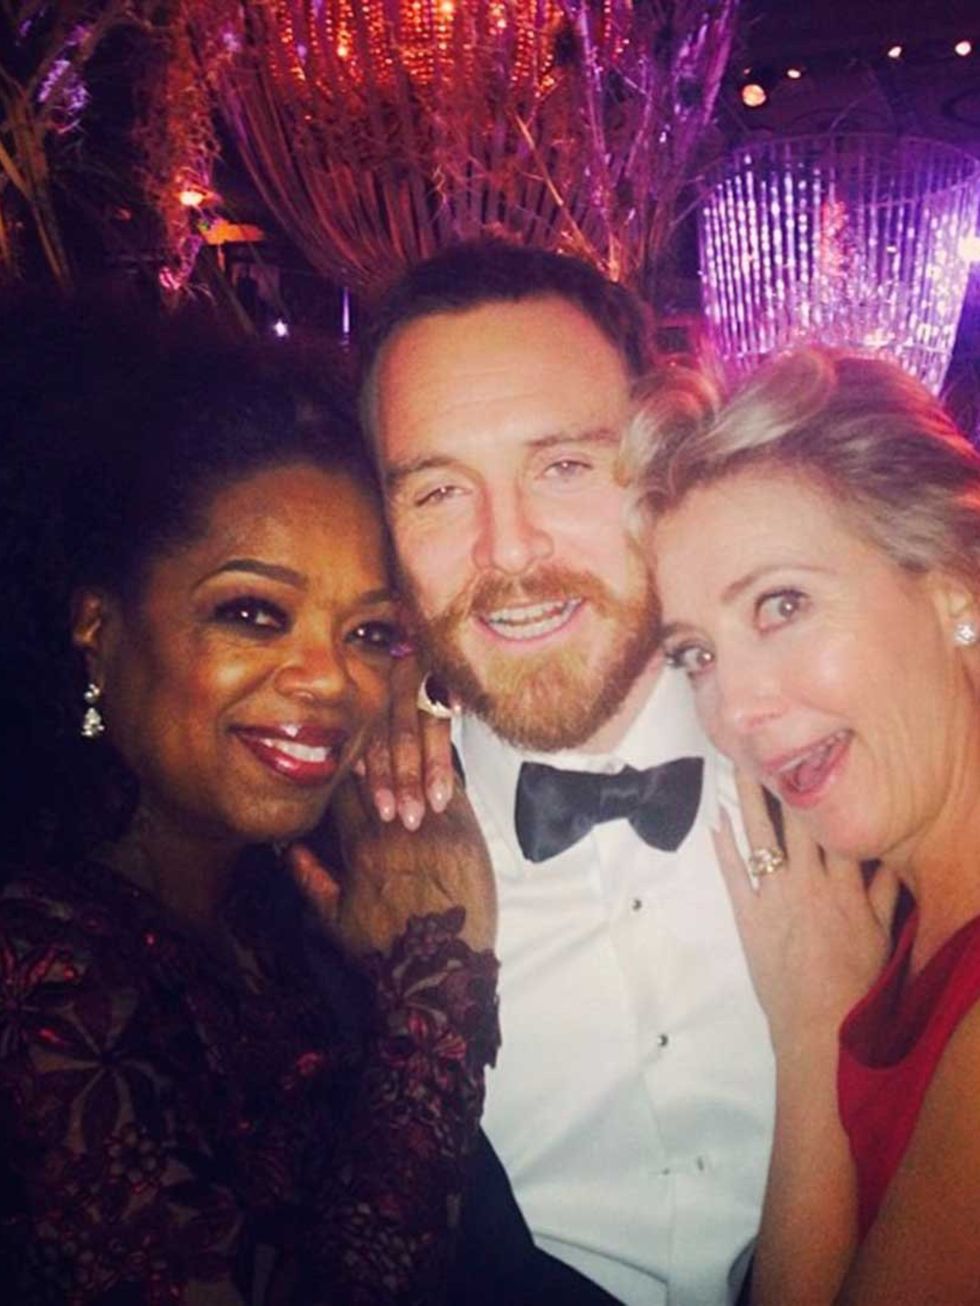 <p>Oprah Winfrey:</p><p>'Party over Here! With Michael Fassbender and Emma Thompson. #BAFTAs'</p>